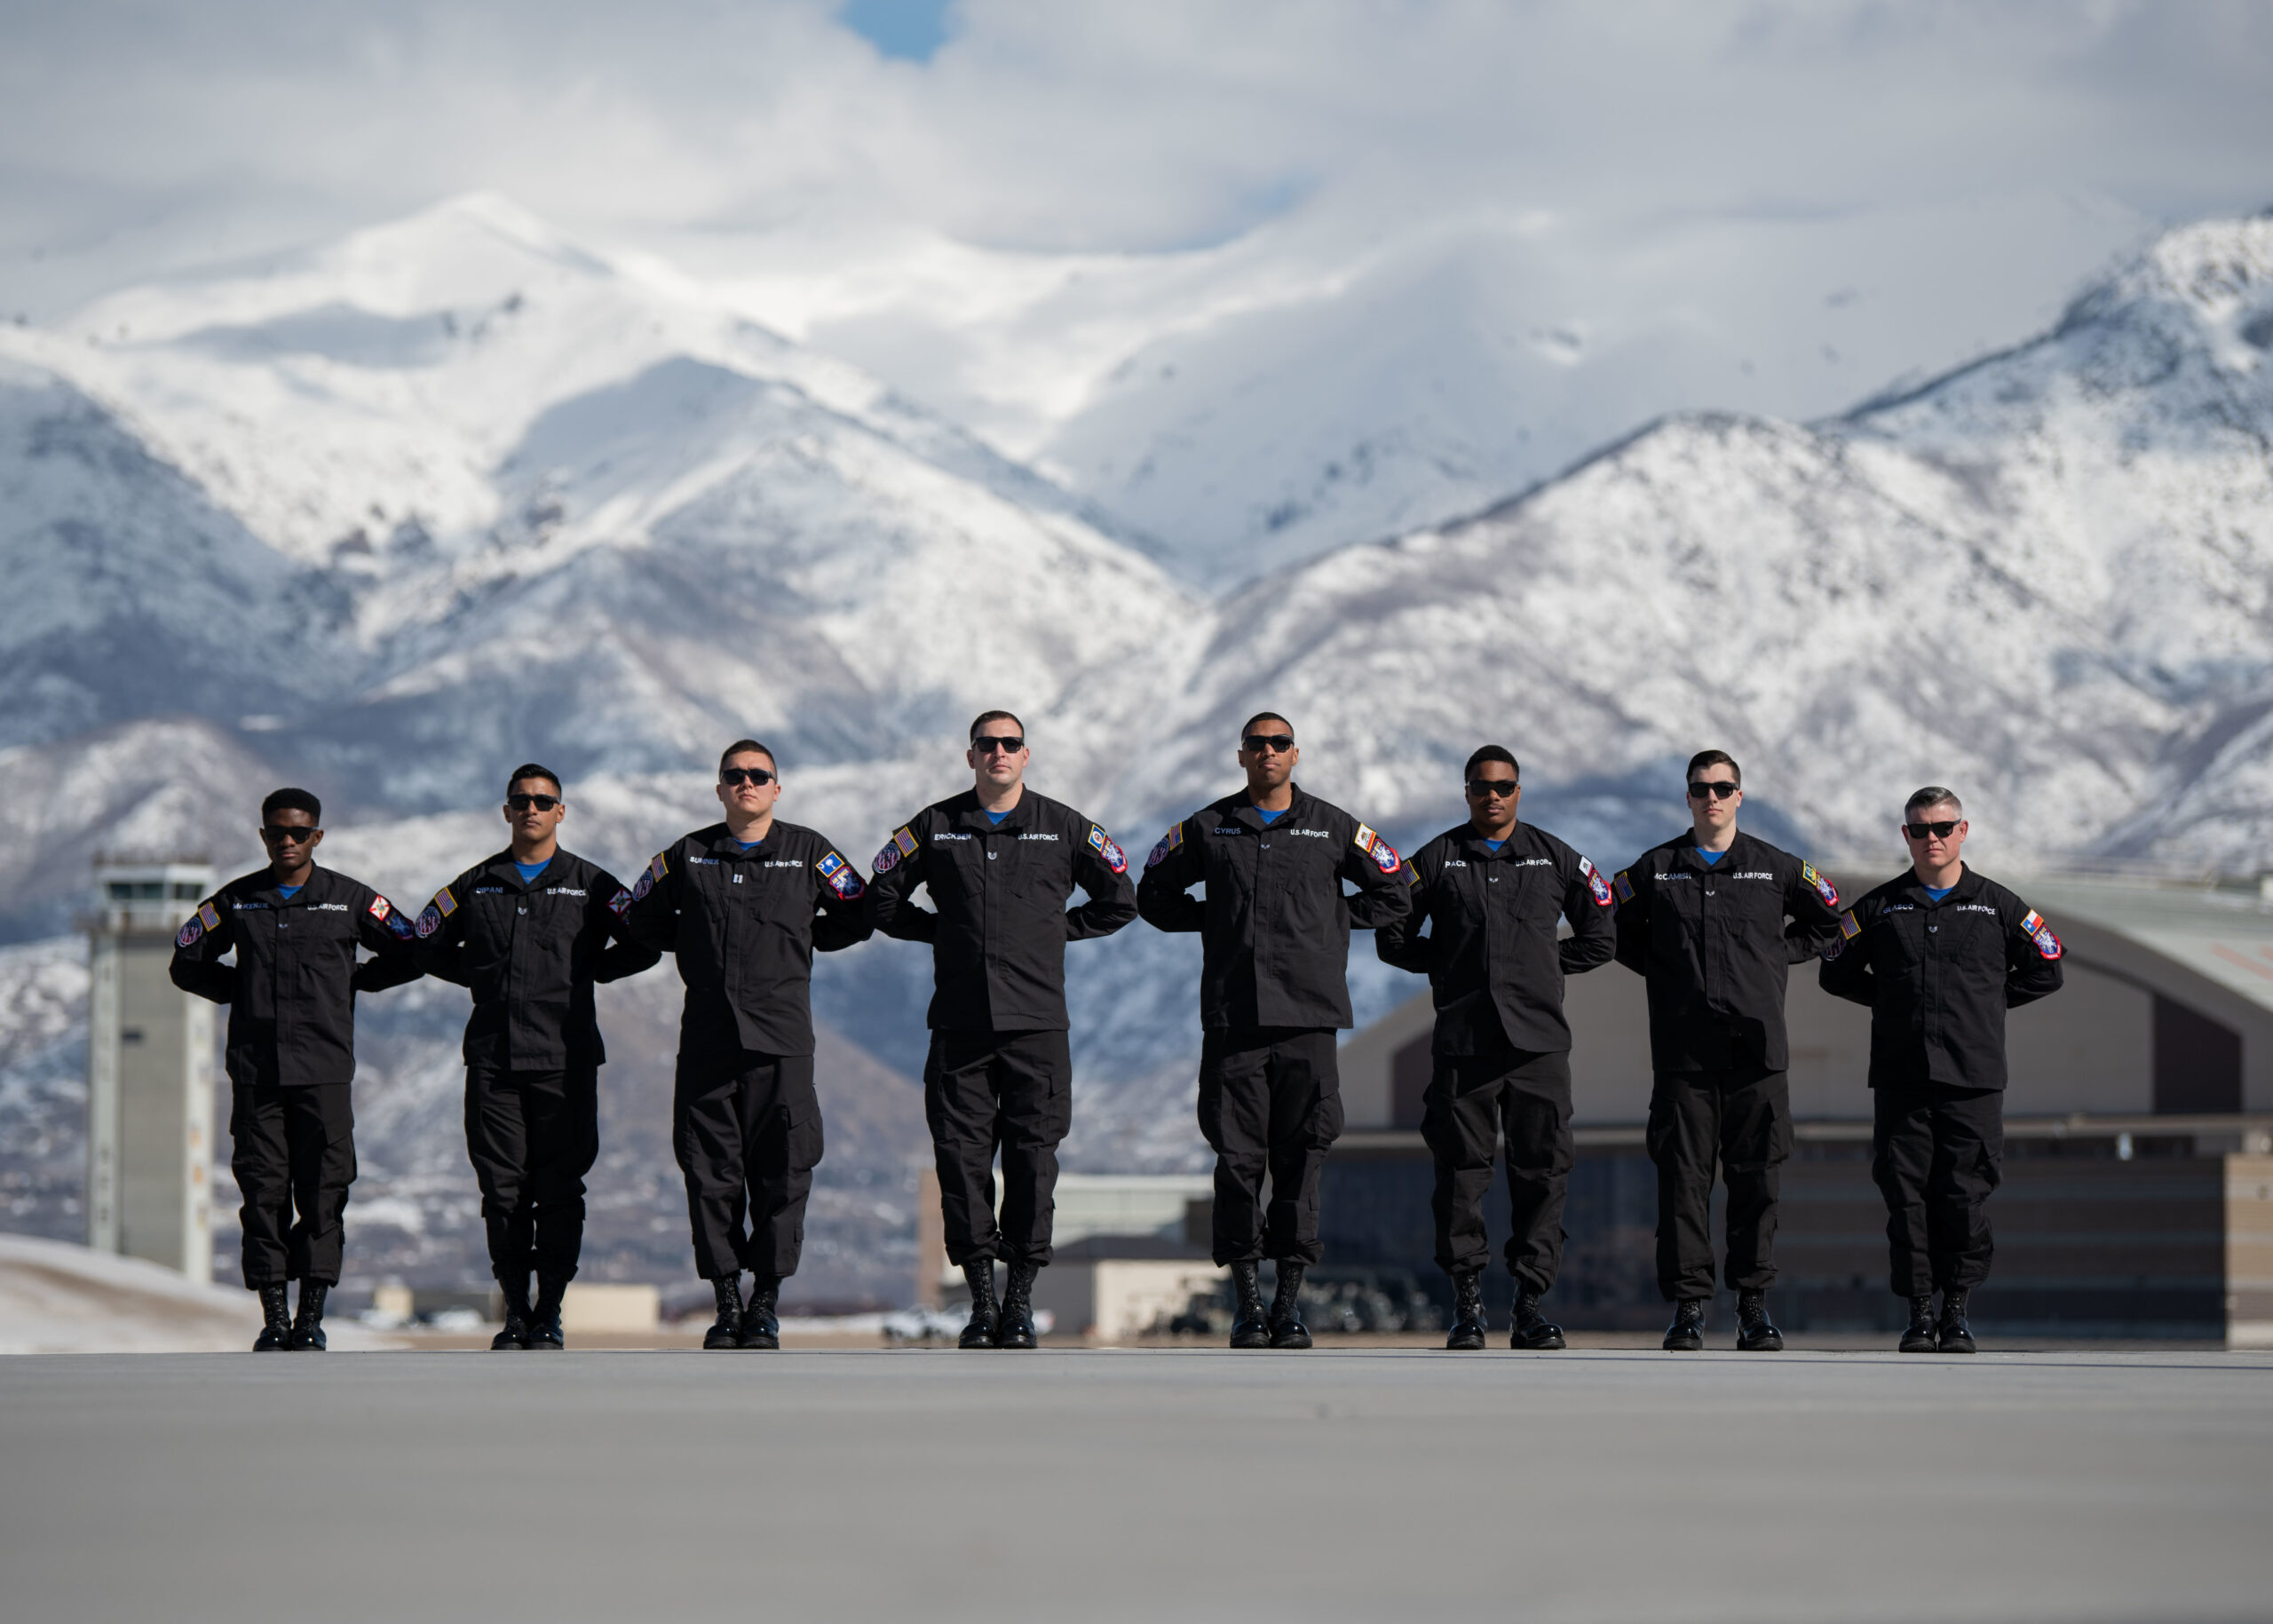 Members of the F-35A Lightning II Demonstration Team practice their formations Feb. 13, 2020, at Hill Air Force Base, Utah. The team consists of 13 Airmen from the aircraft maintenance, aircrew flight equipment, and public affairs career fields. (U.S. Air Force photo by Staff Sgt. Zachary Boyer)